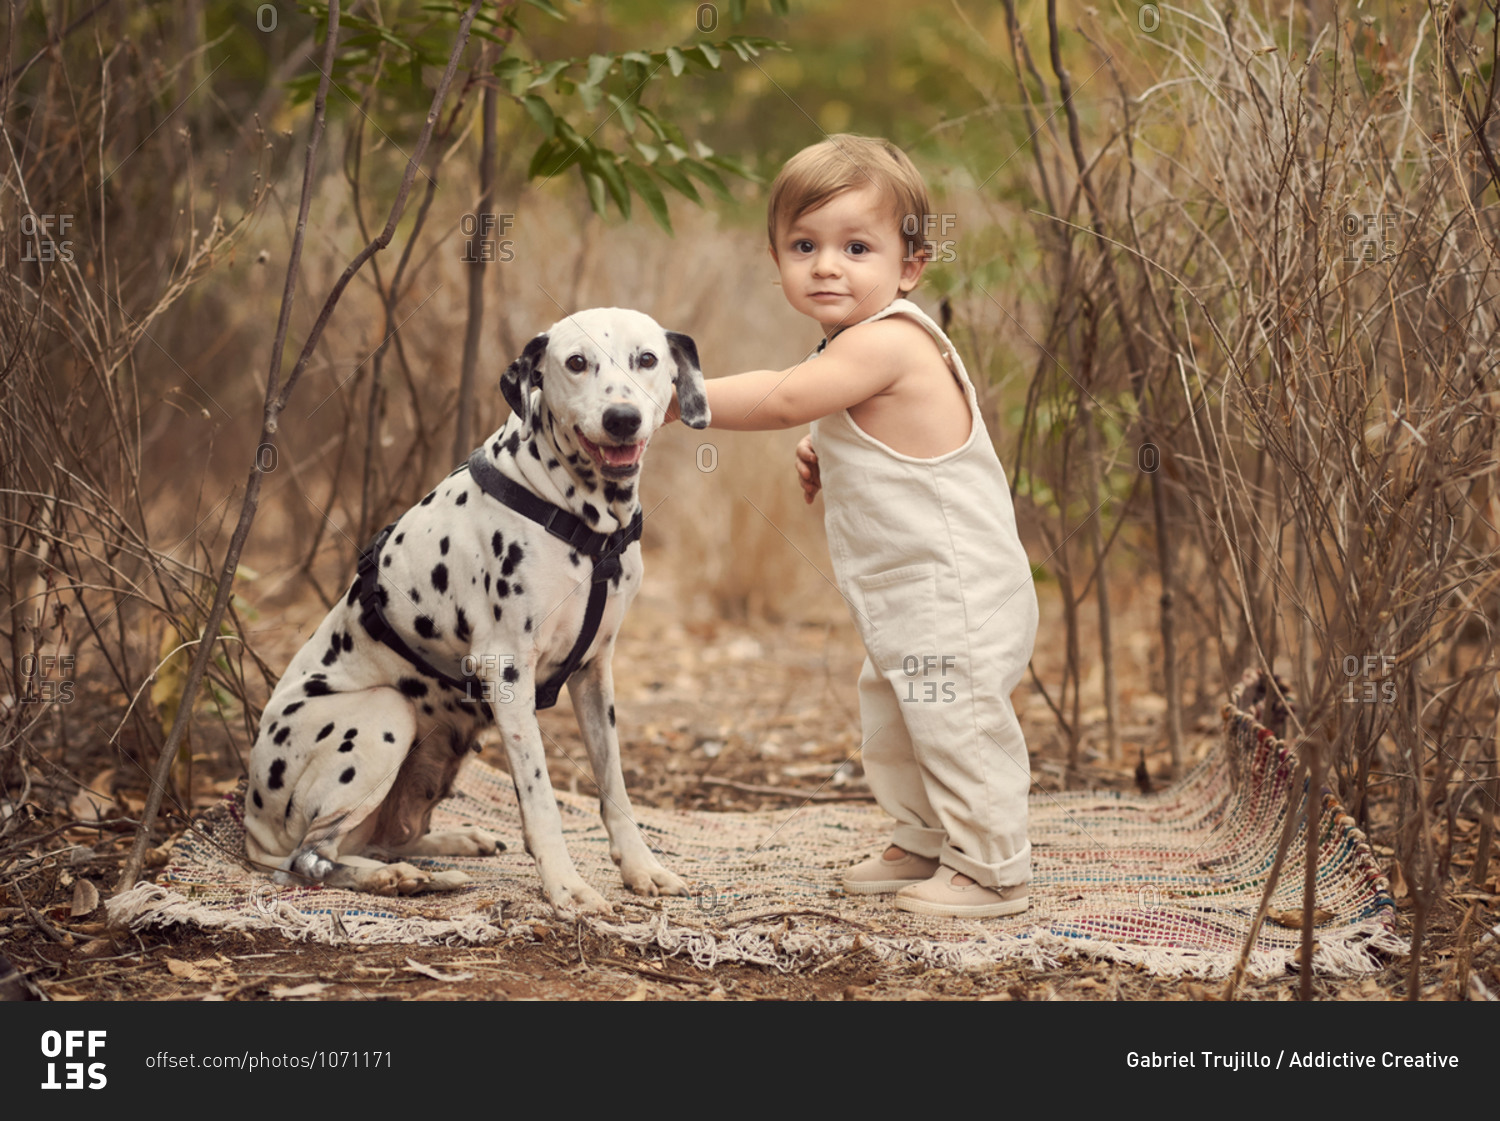 Side view full body of adorable toddler in overall standing petting Dalmatian dog near tall plants while smiling and looking at camera